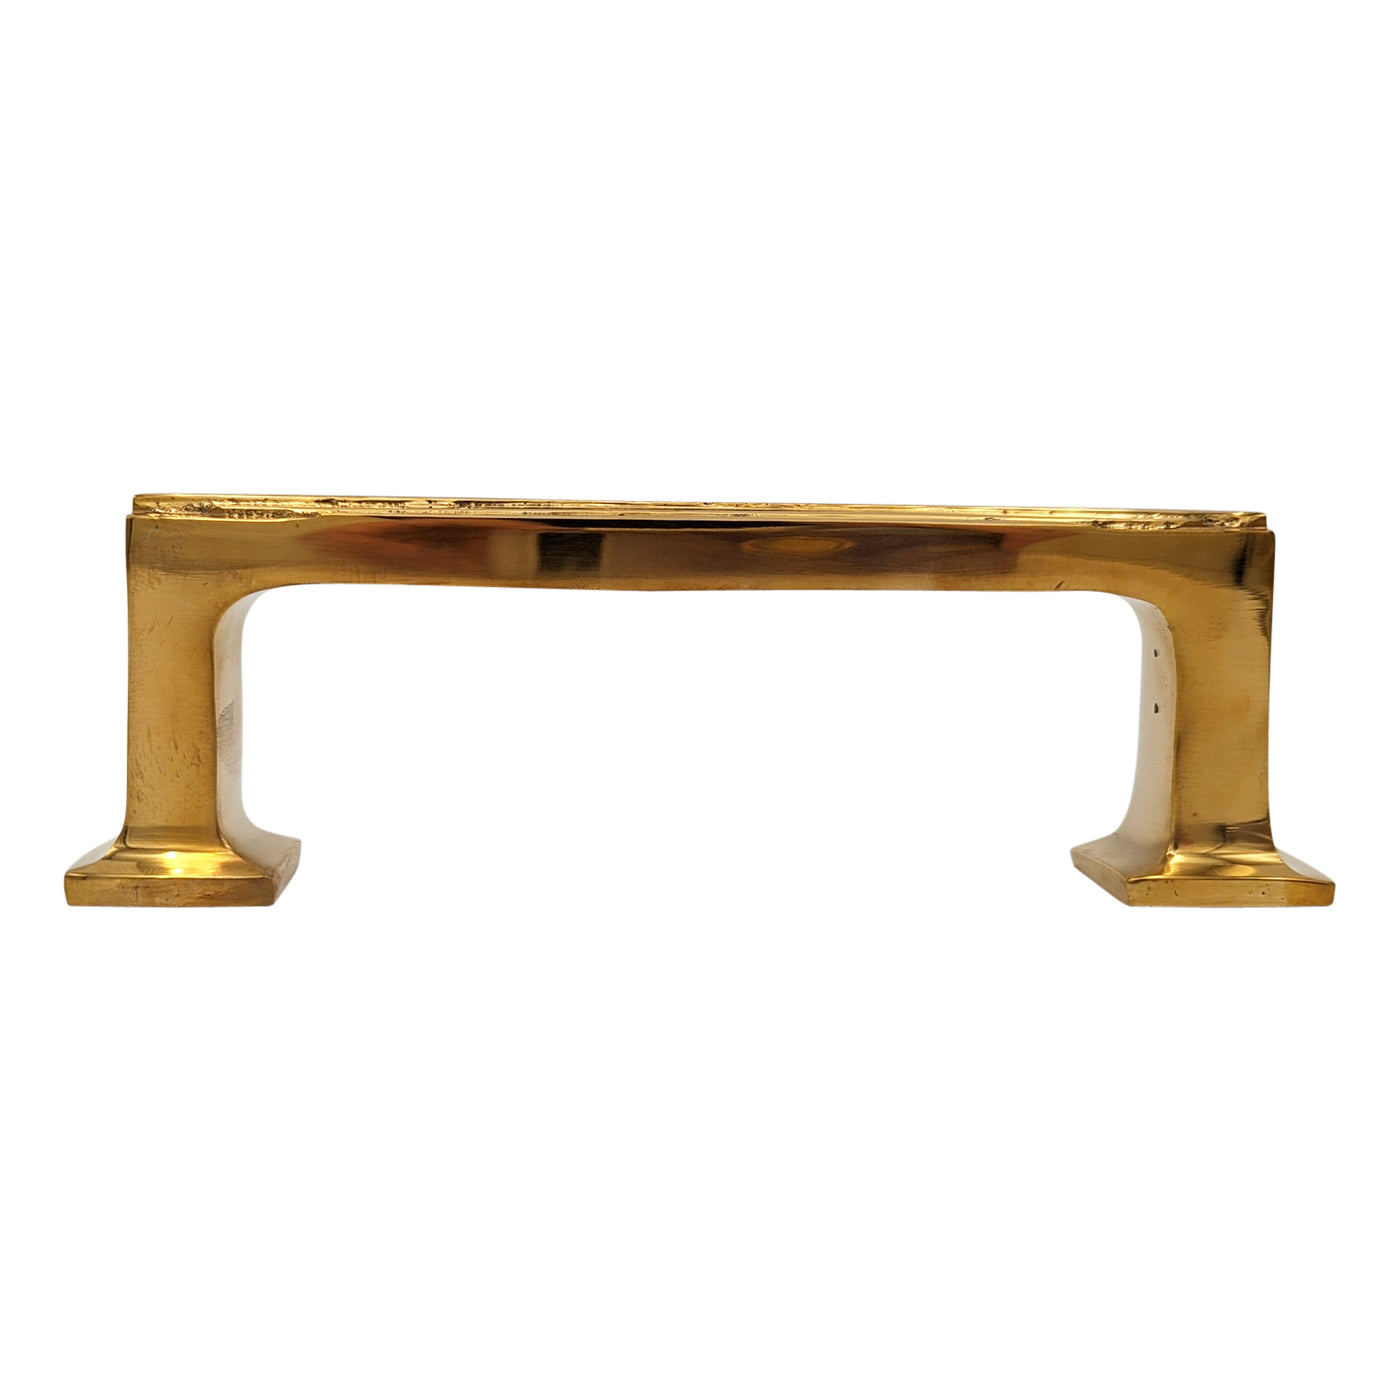 7 Inch Solid Brass Art Deco Skyscraper Pull (Several Finishes Available)